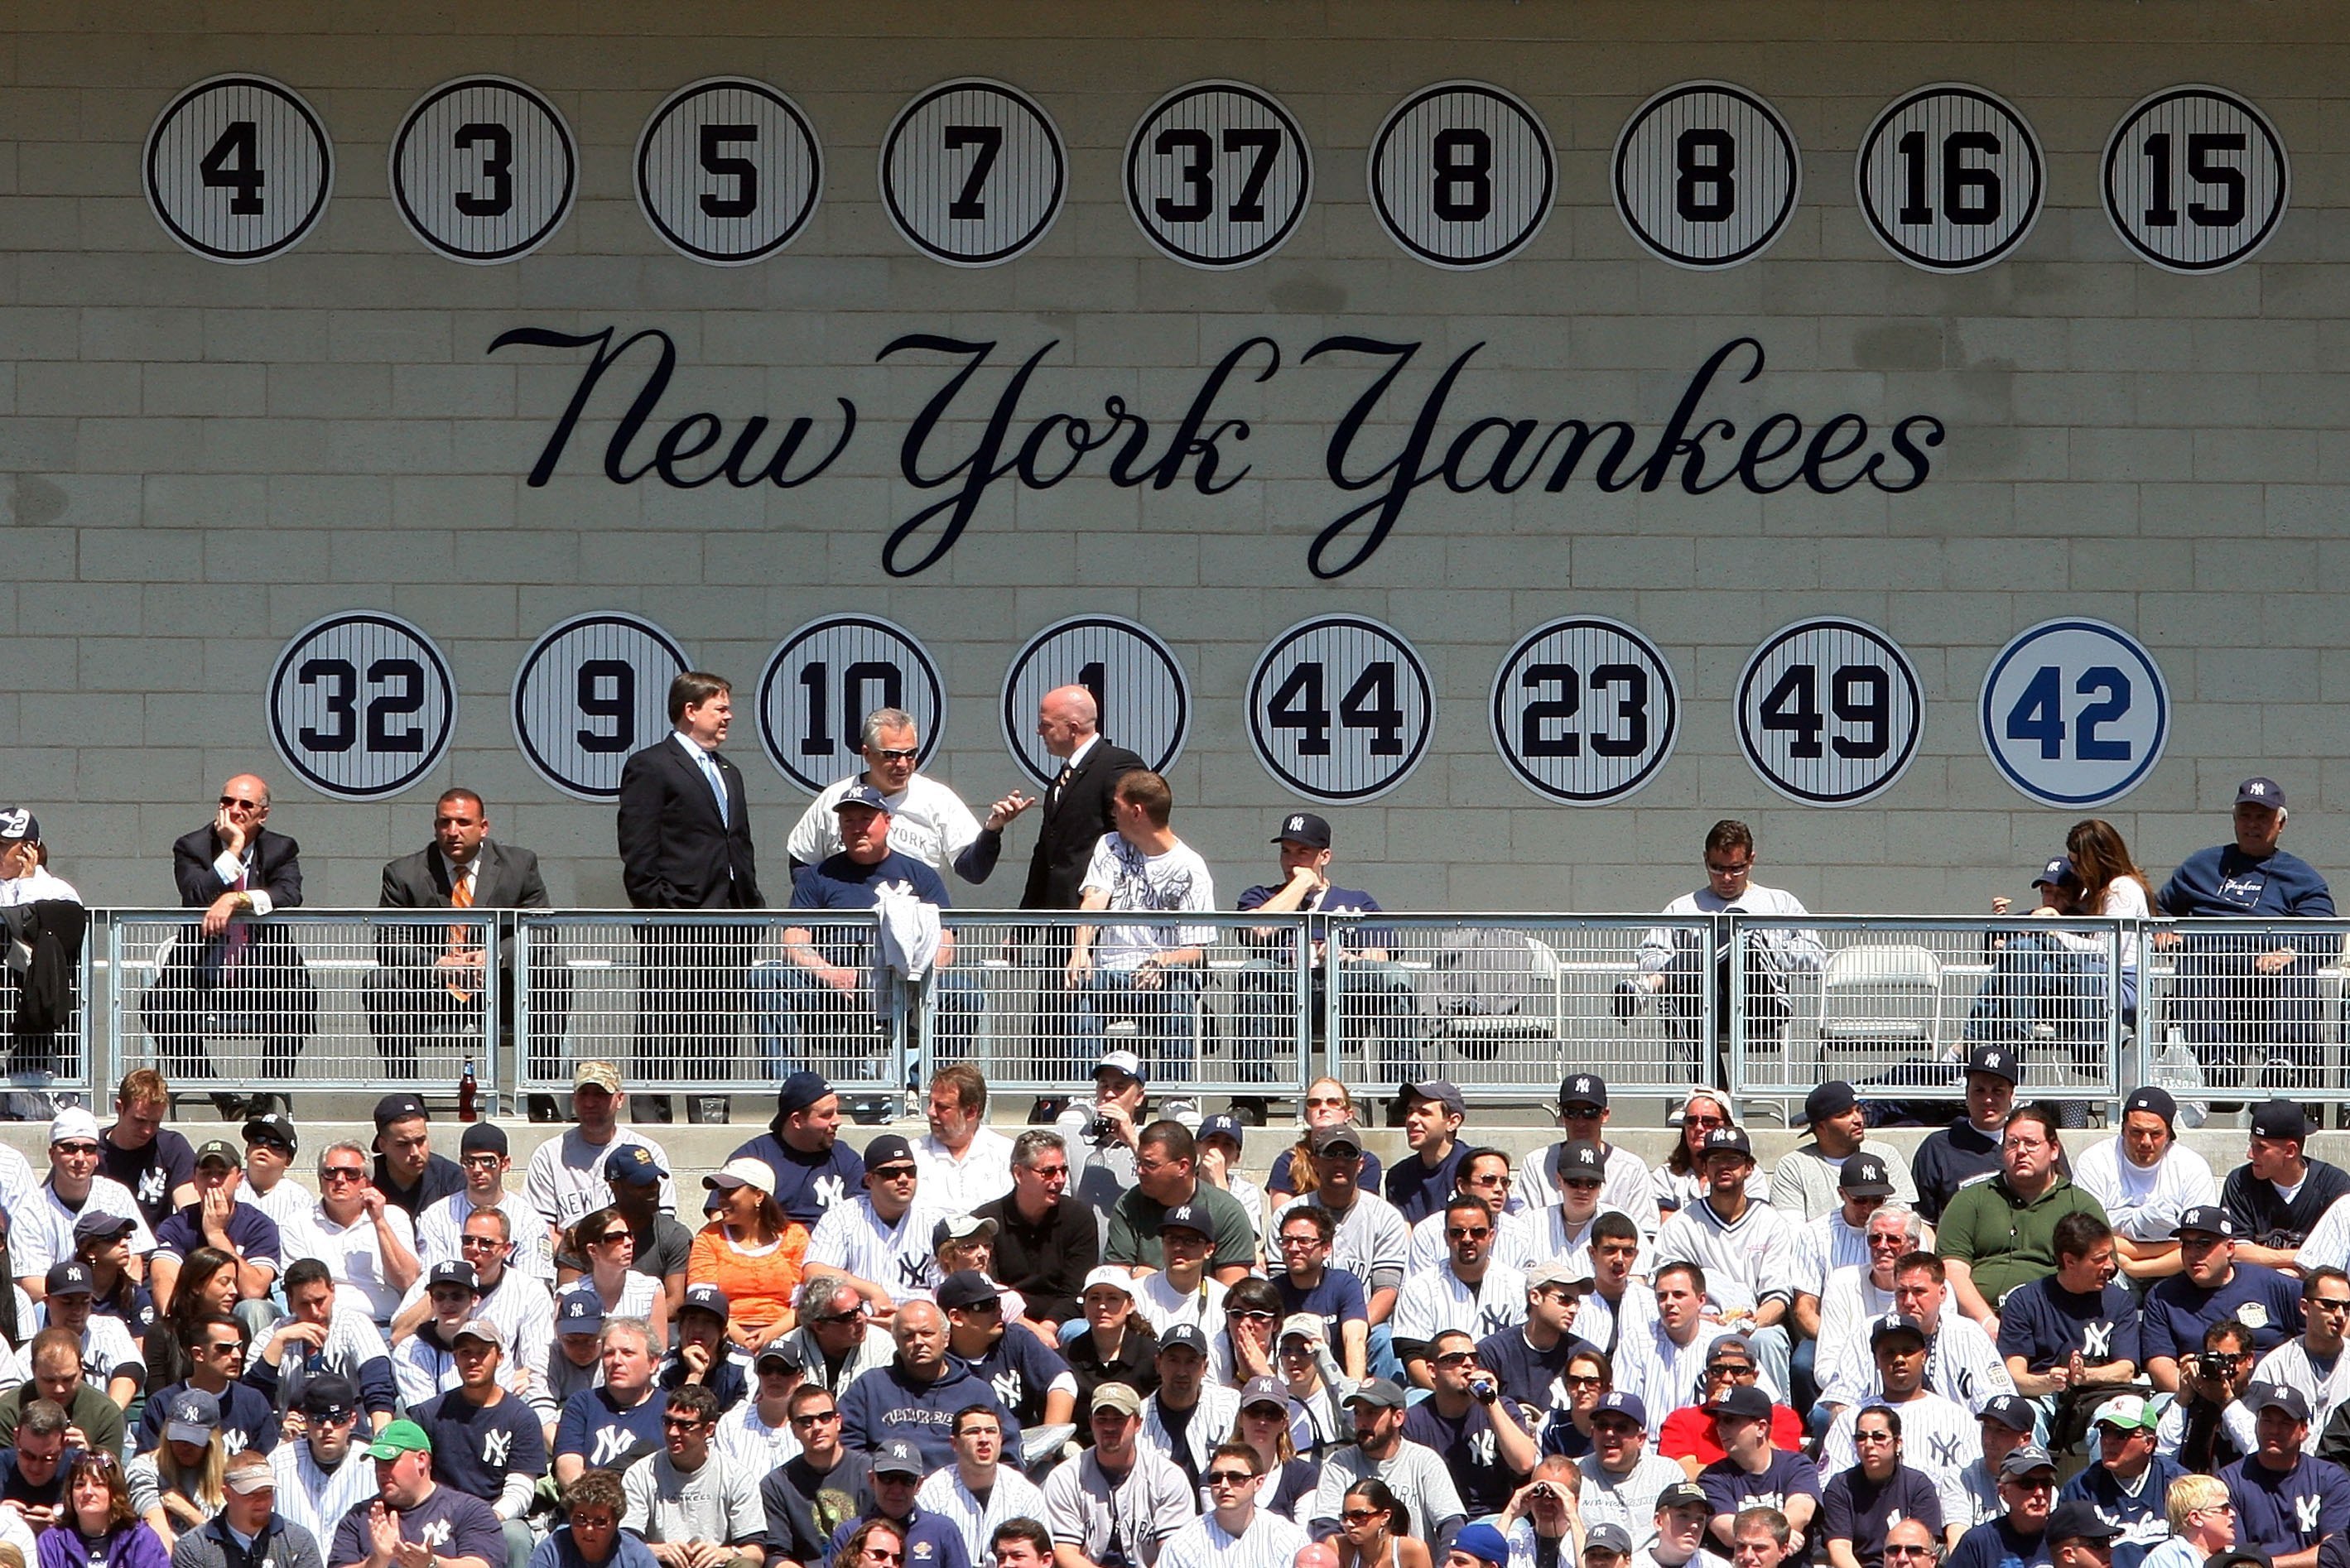 Greatest New York Yankees of All Time